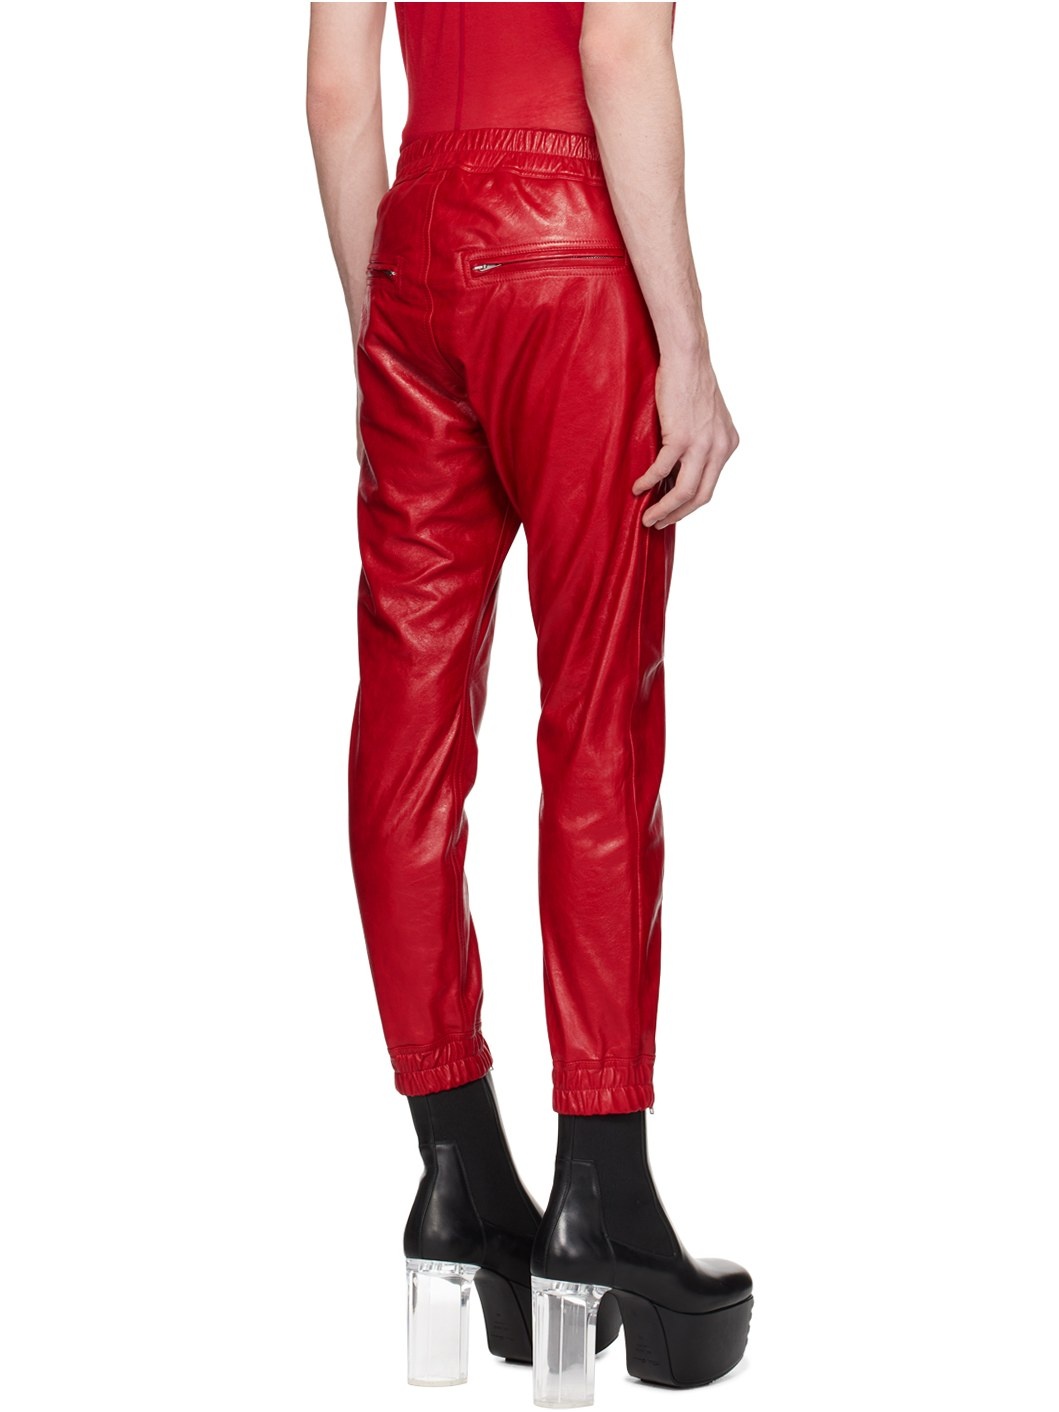 Red Luxor Leather Pants - 3